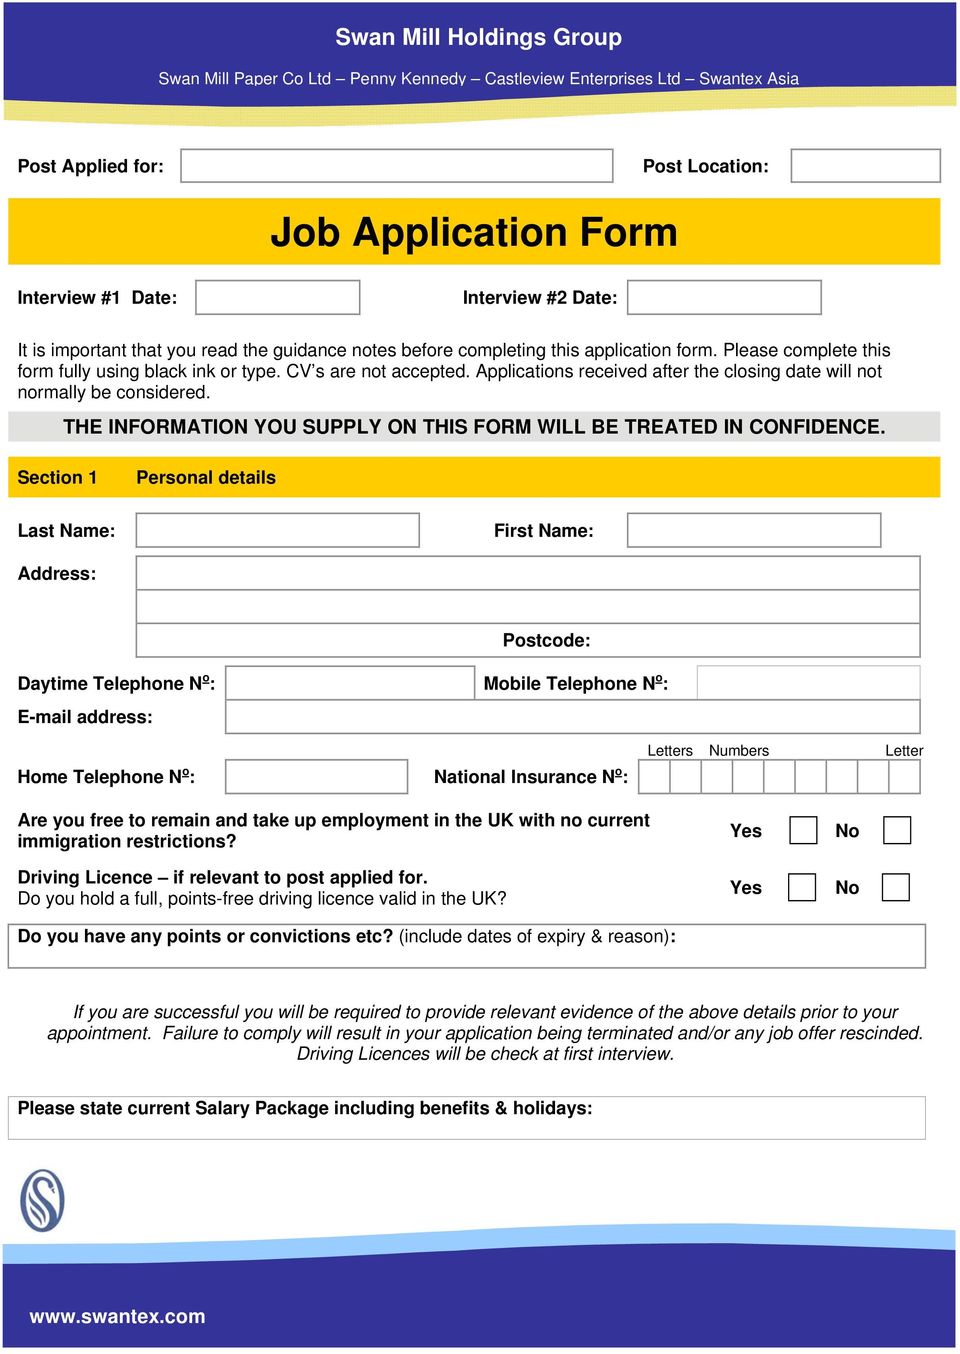 Applications received after the closing date will not normally be considered. THE INFORMATION YOU SUPPLY ON THIS FORM WILL BE TREATED IN CONFIDENCE.